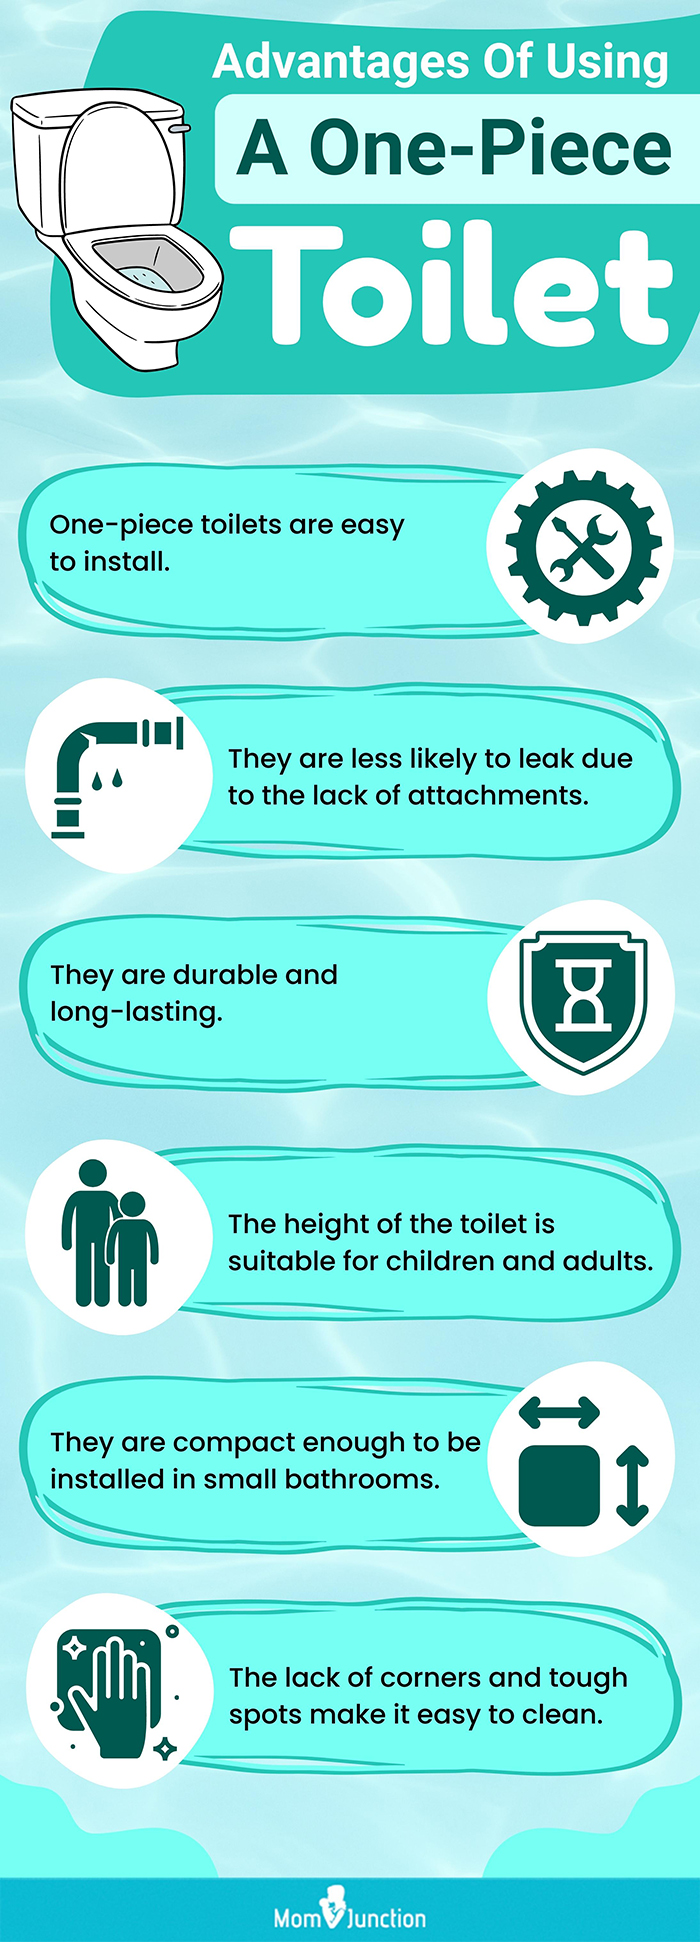 Advantages Of Using A One-Piece Toilet (Infographic)